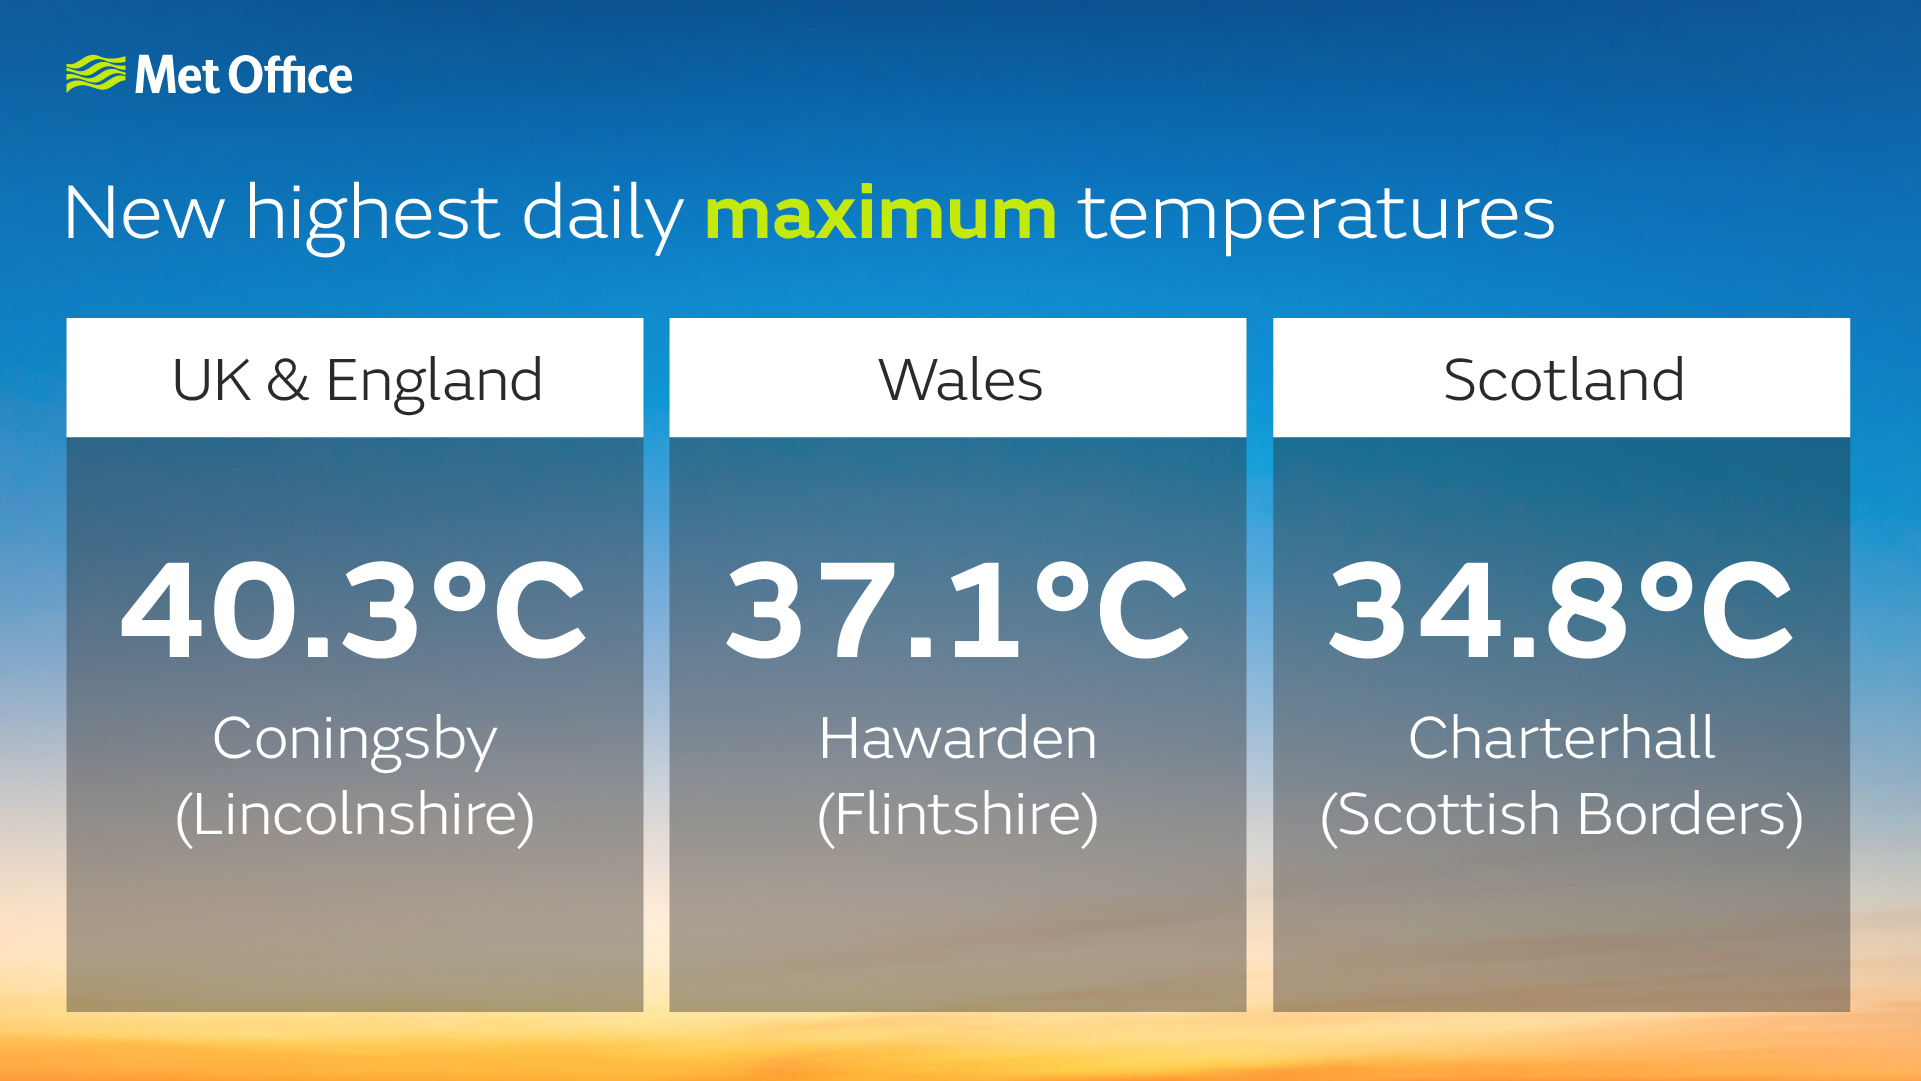 Met Office infographic showing 'New highest daily maximum temperatures'. These are shown as being recorded as: UK & England 40.3°C in Coningsby (Lincolnshire); Wales 37.1°C in Hawarden (Flintshire); Scotland 34.8°C in Charterhall (Scottish Borders).